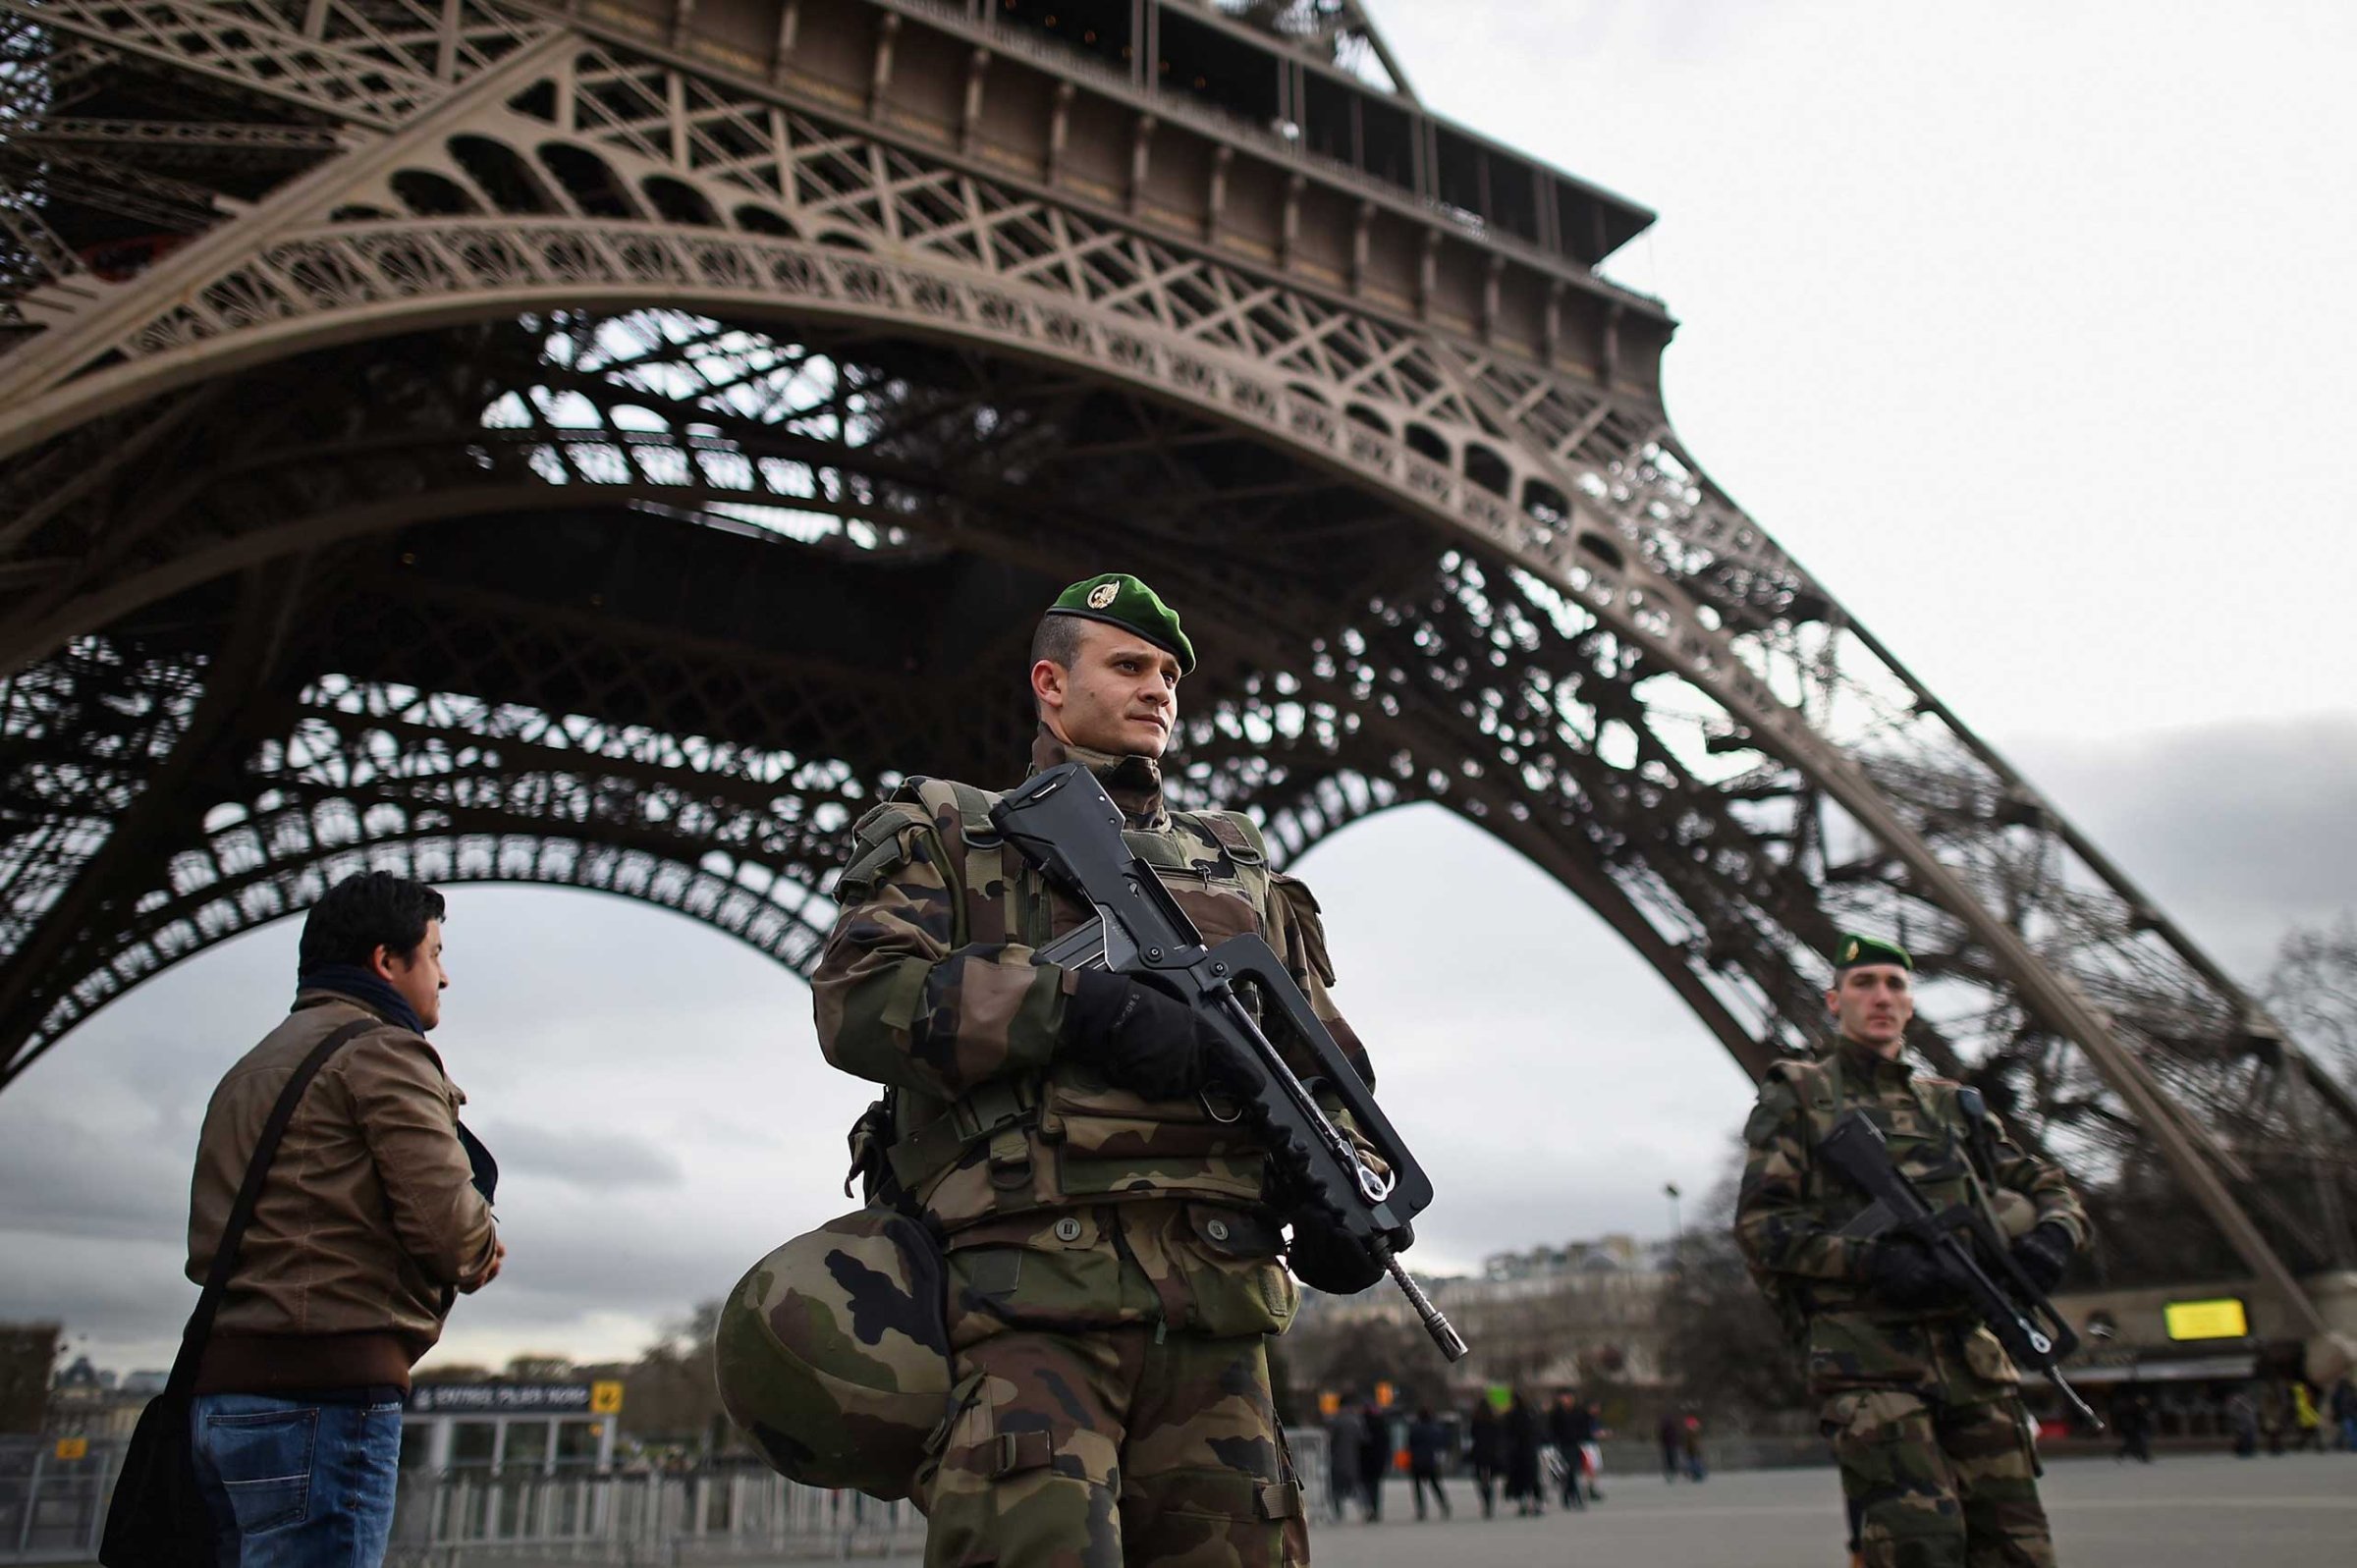 French troops patrol around the Eiffel Tower on Jan. 12, 2015 in Paris.